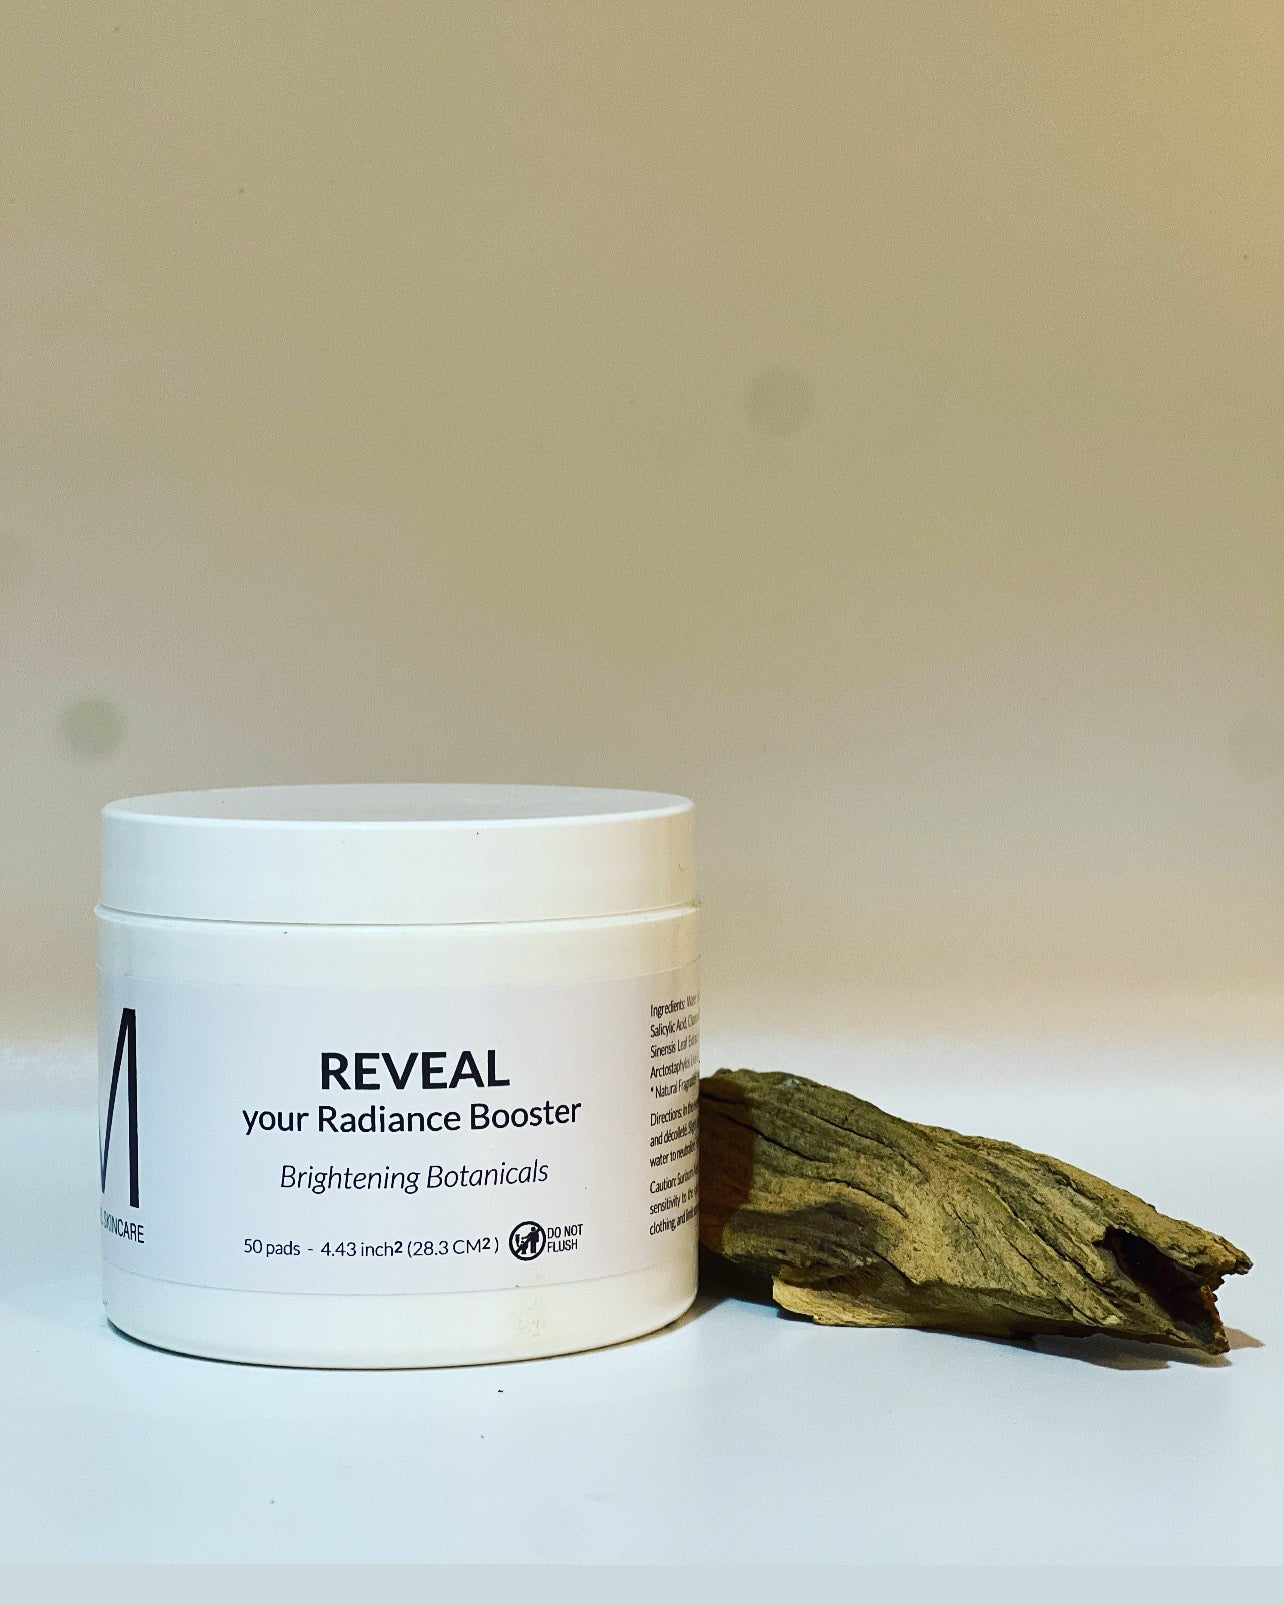 REVEAL YOUR RADIANCE BOOSTER - Brightening Botanicals